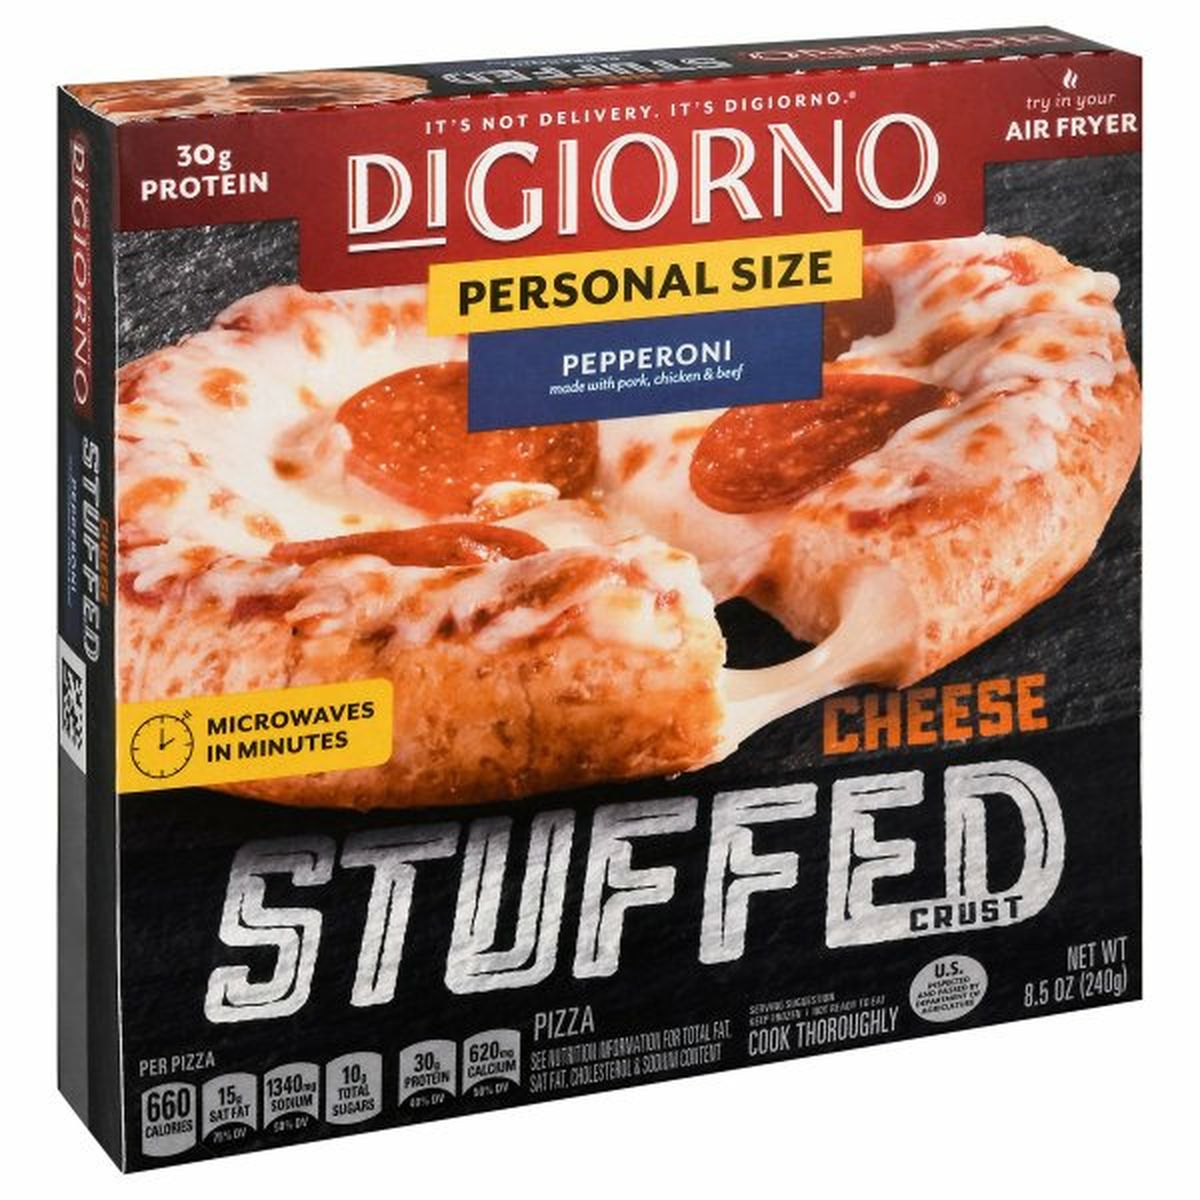 Calories in DiGiorno Pizza, Pepperoni, Cheese Stuffed Crust, Personal Size